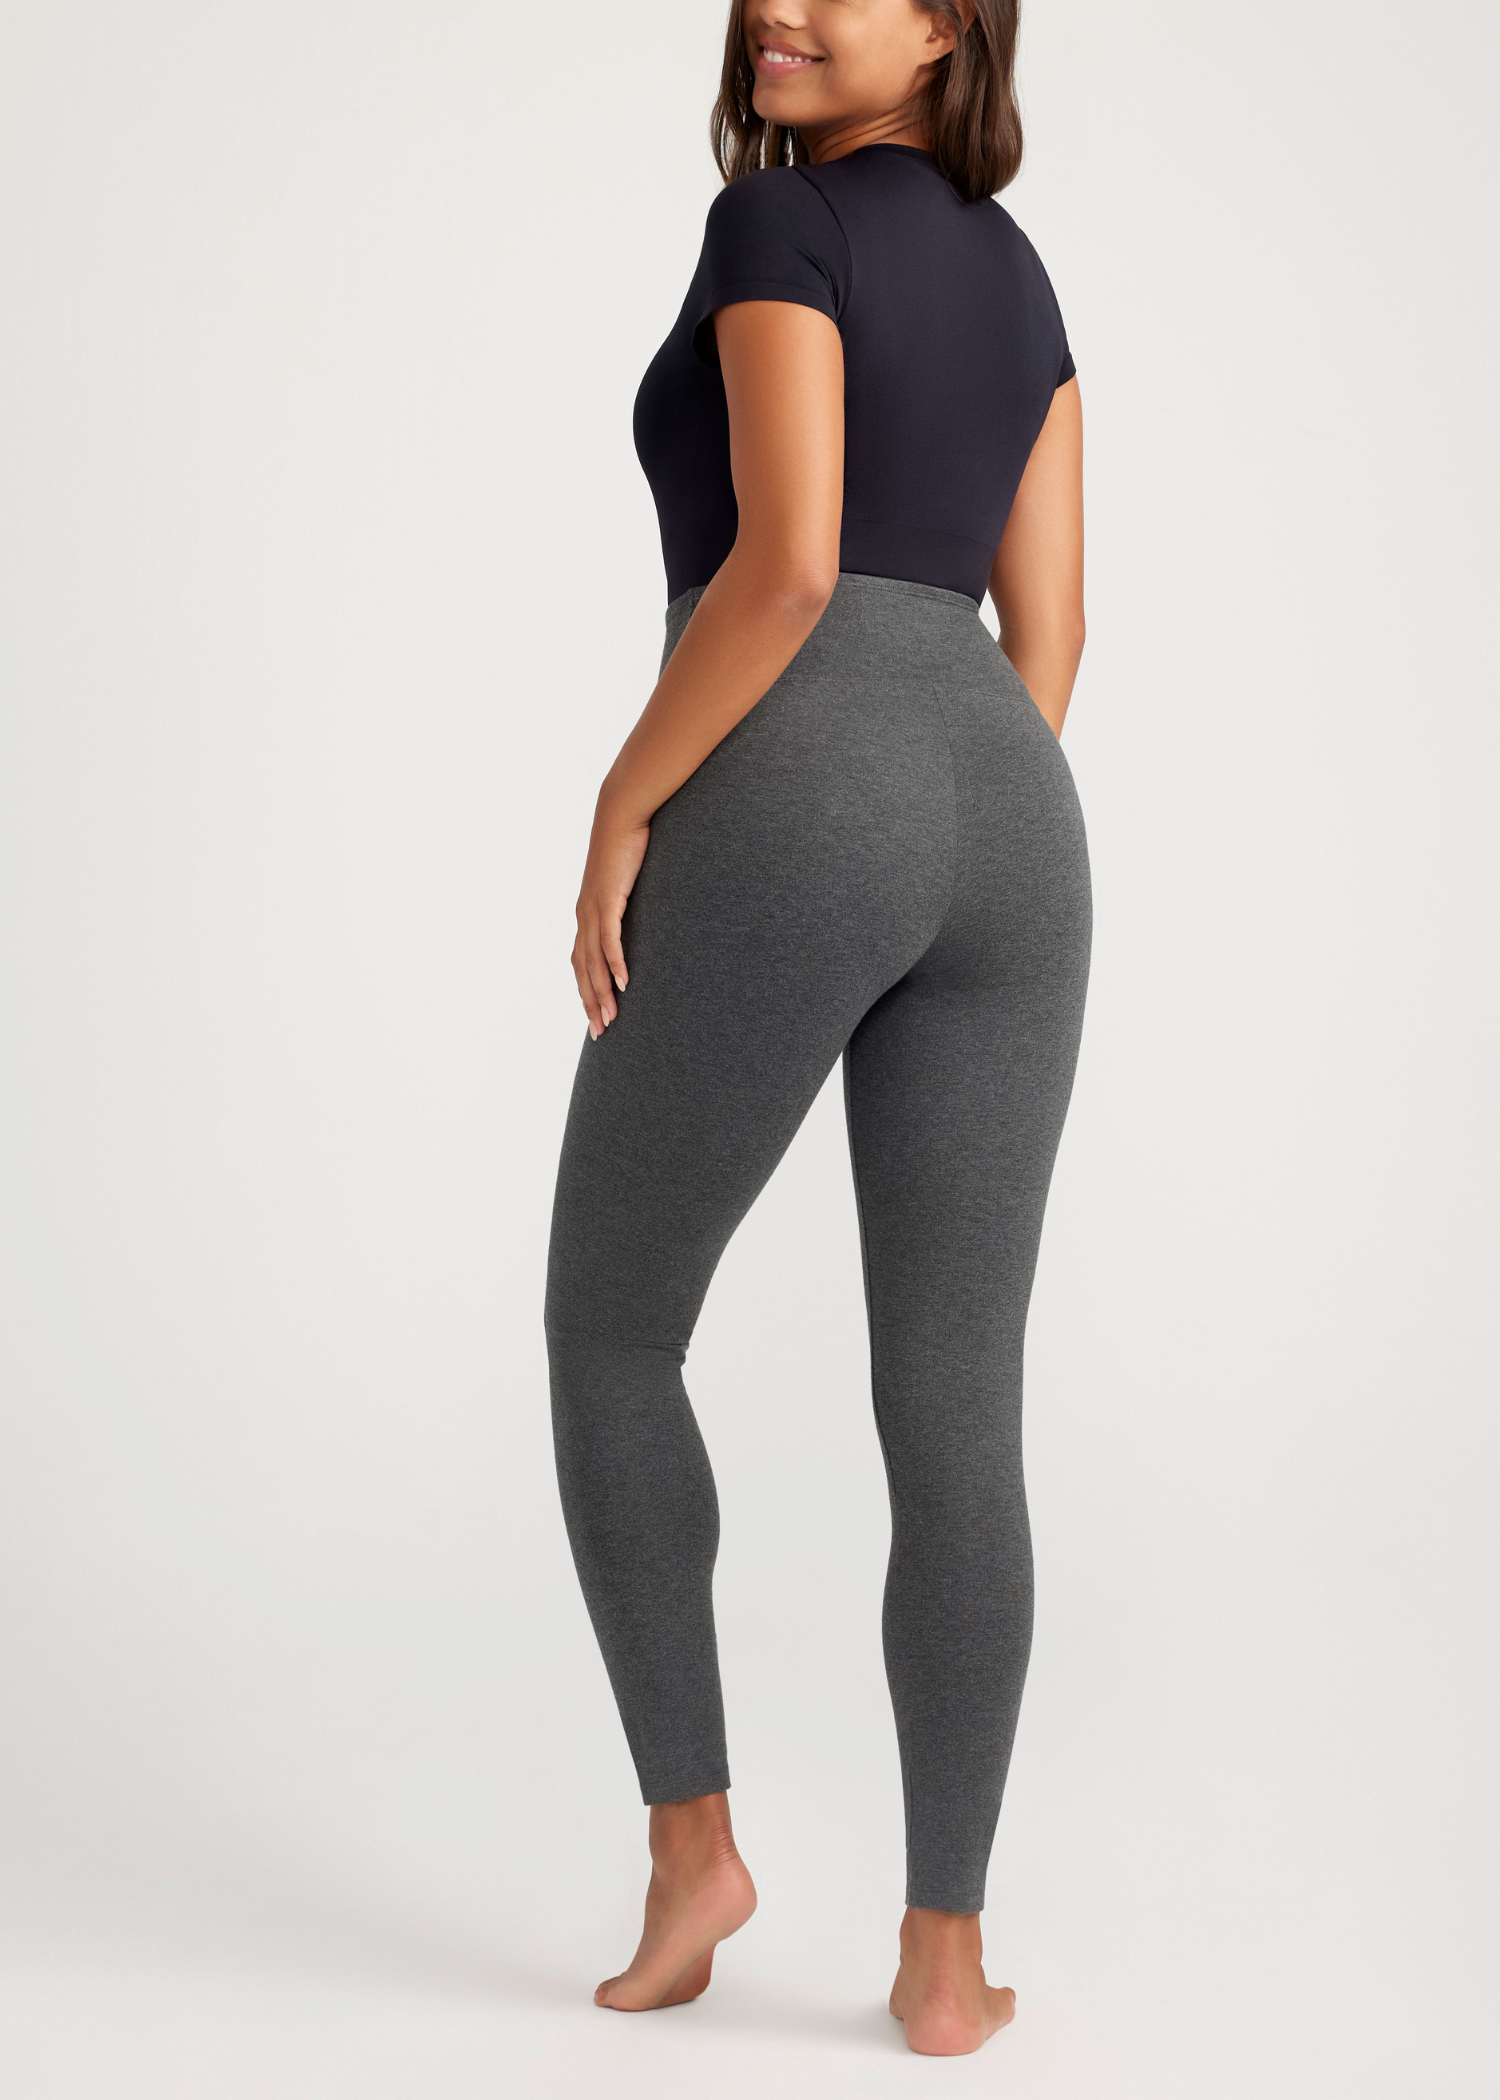 Mia cream ribbed crop leggings activewear set – Glamify Famous For  Loungewear